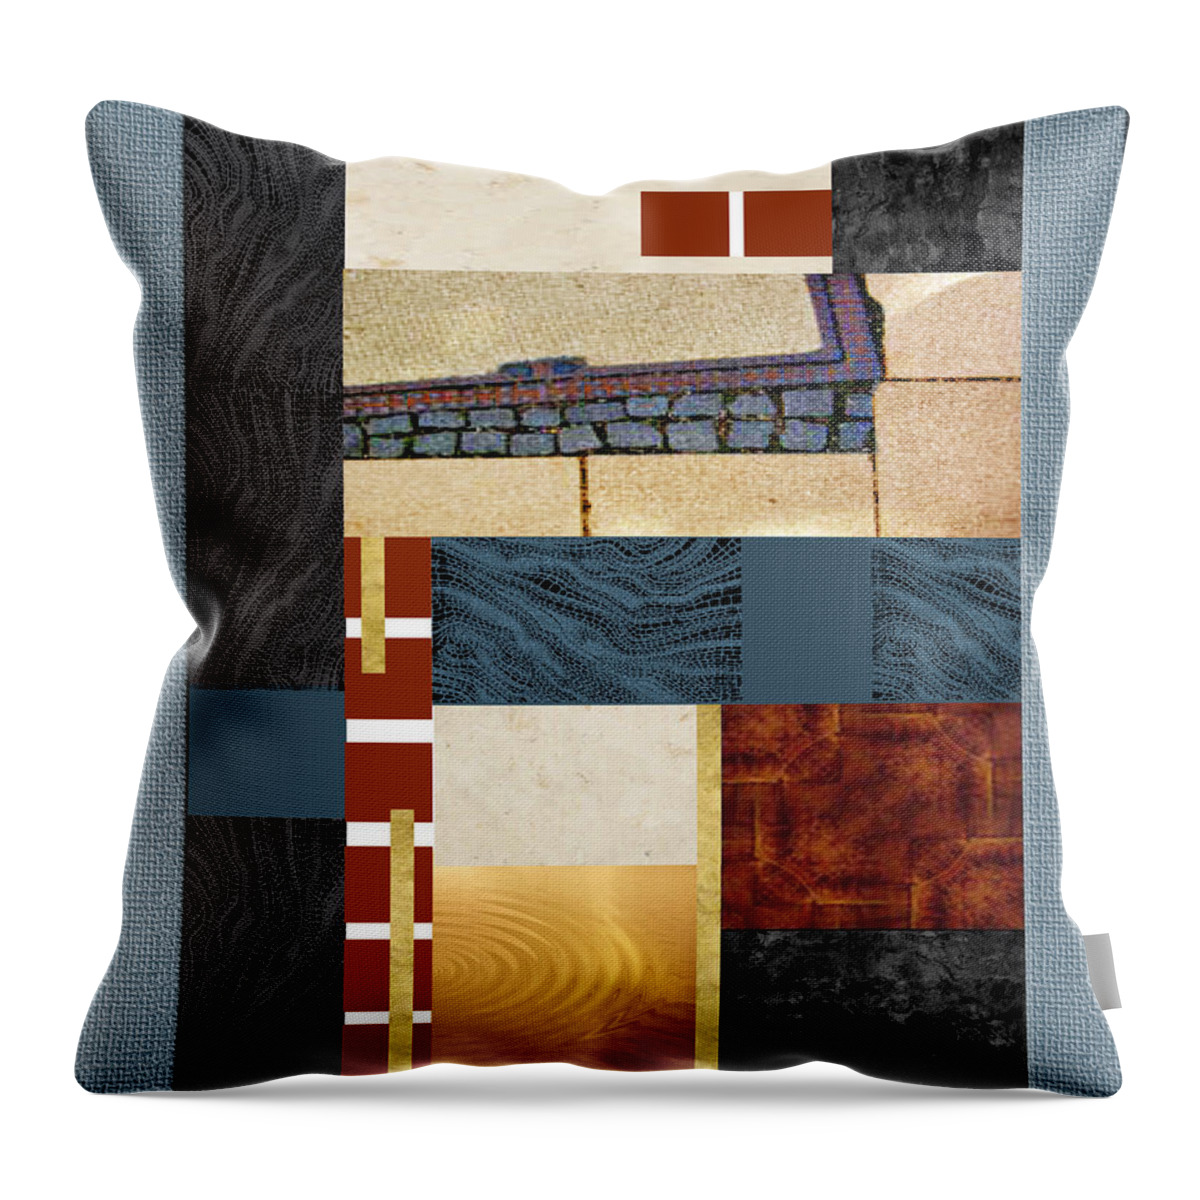 Multi Plated Cushion Covers (16x16) Inches